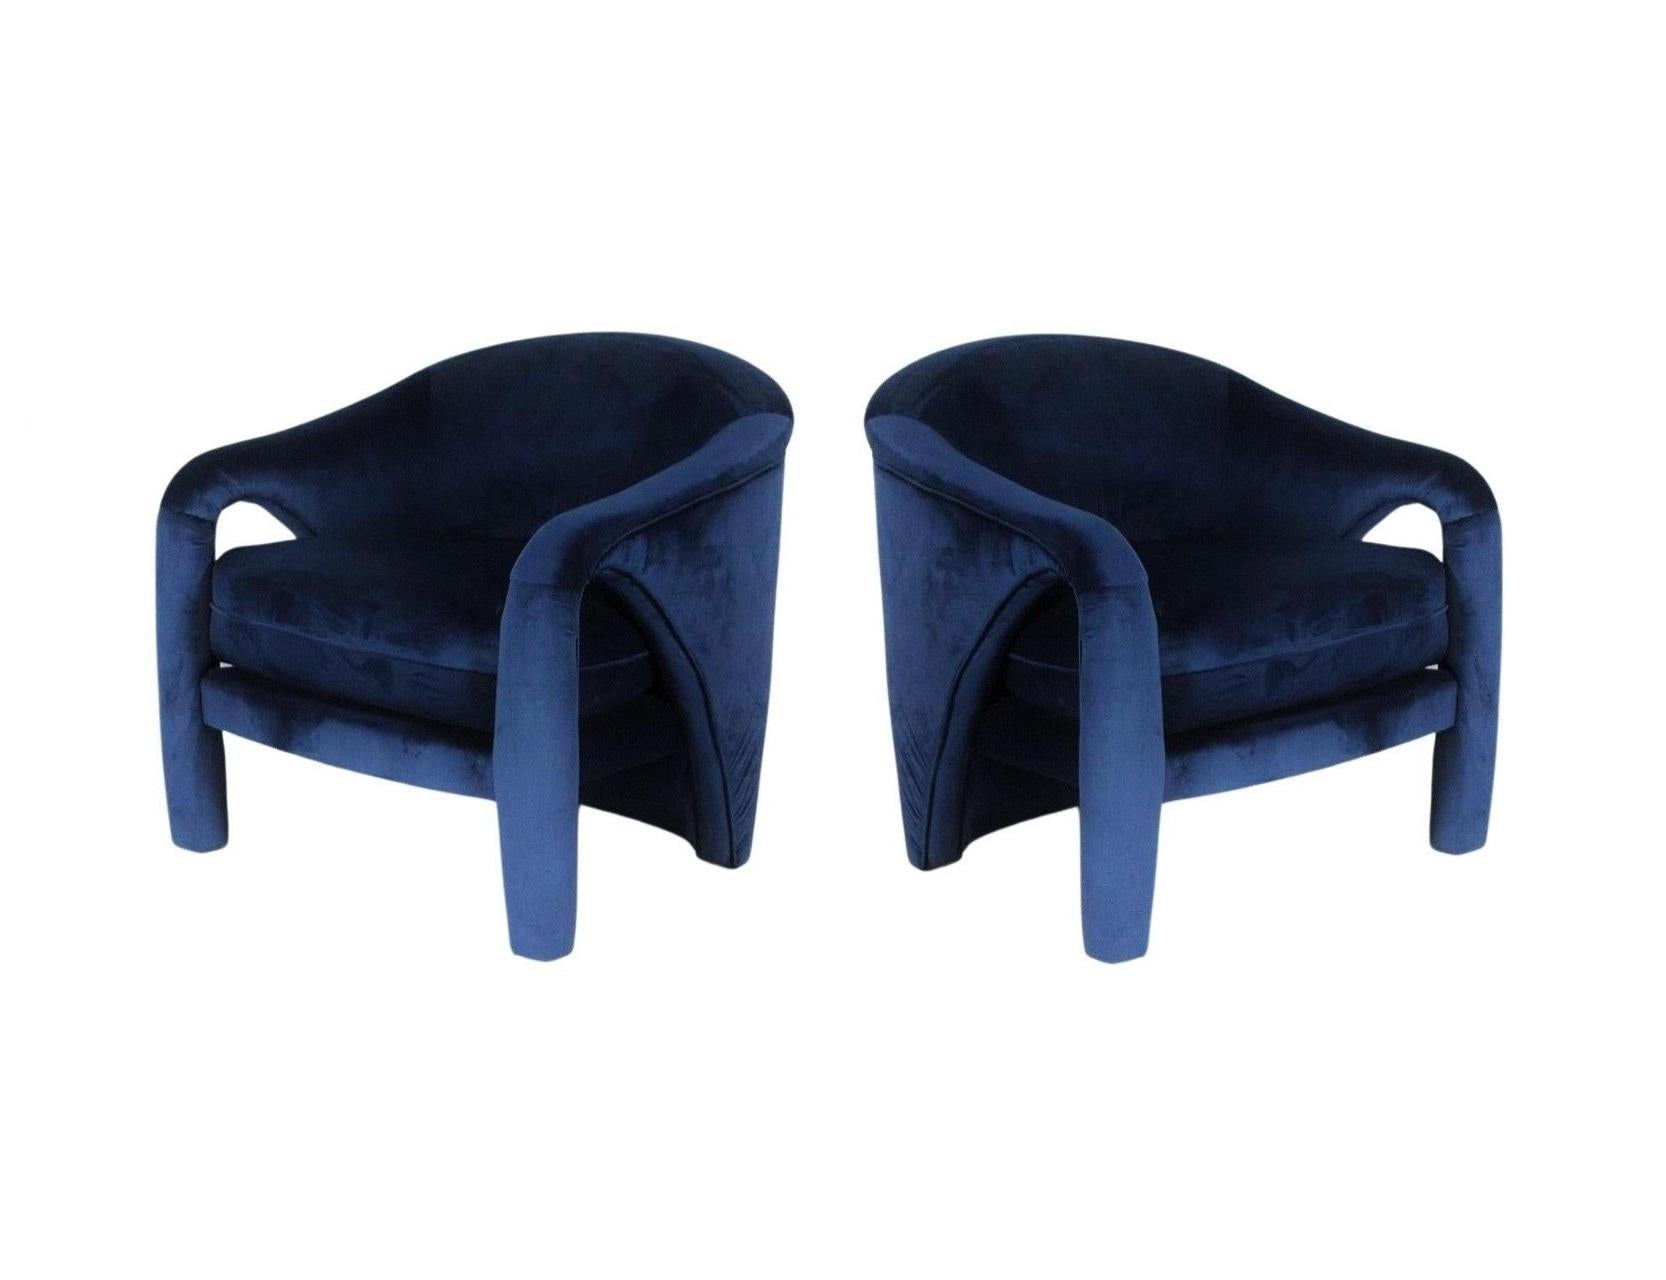 Vladimir Kaganesque Navy Blue Lounge Chairs by Weiman For Sale 7